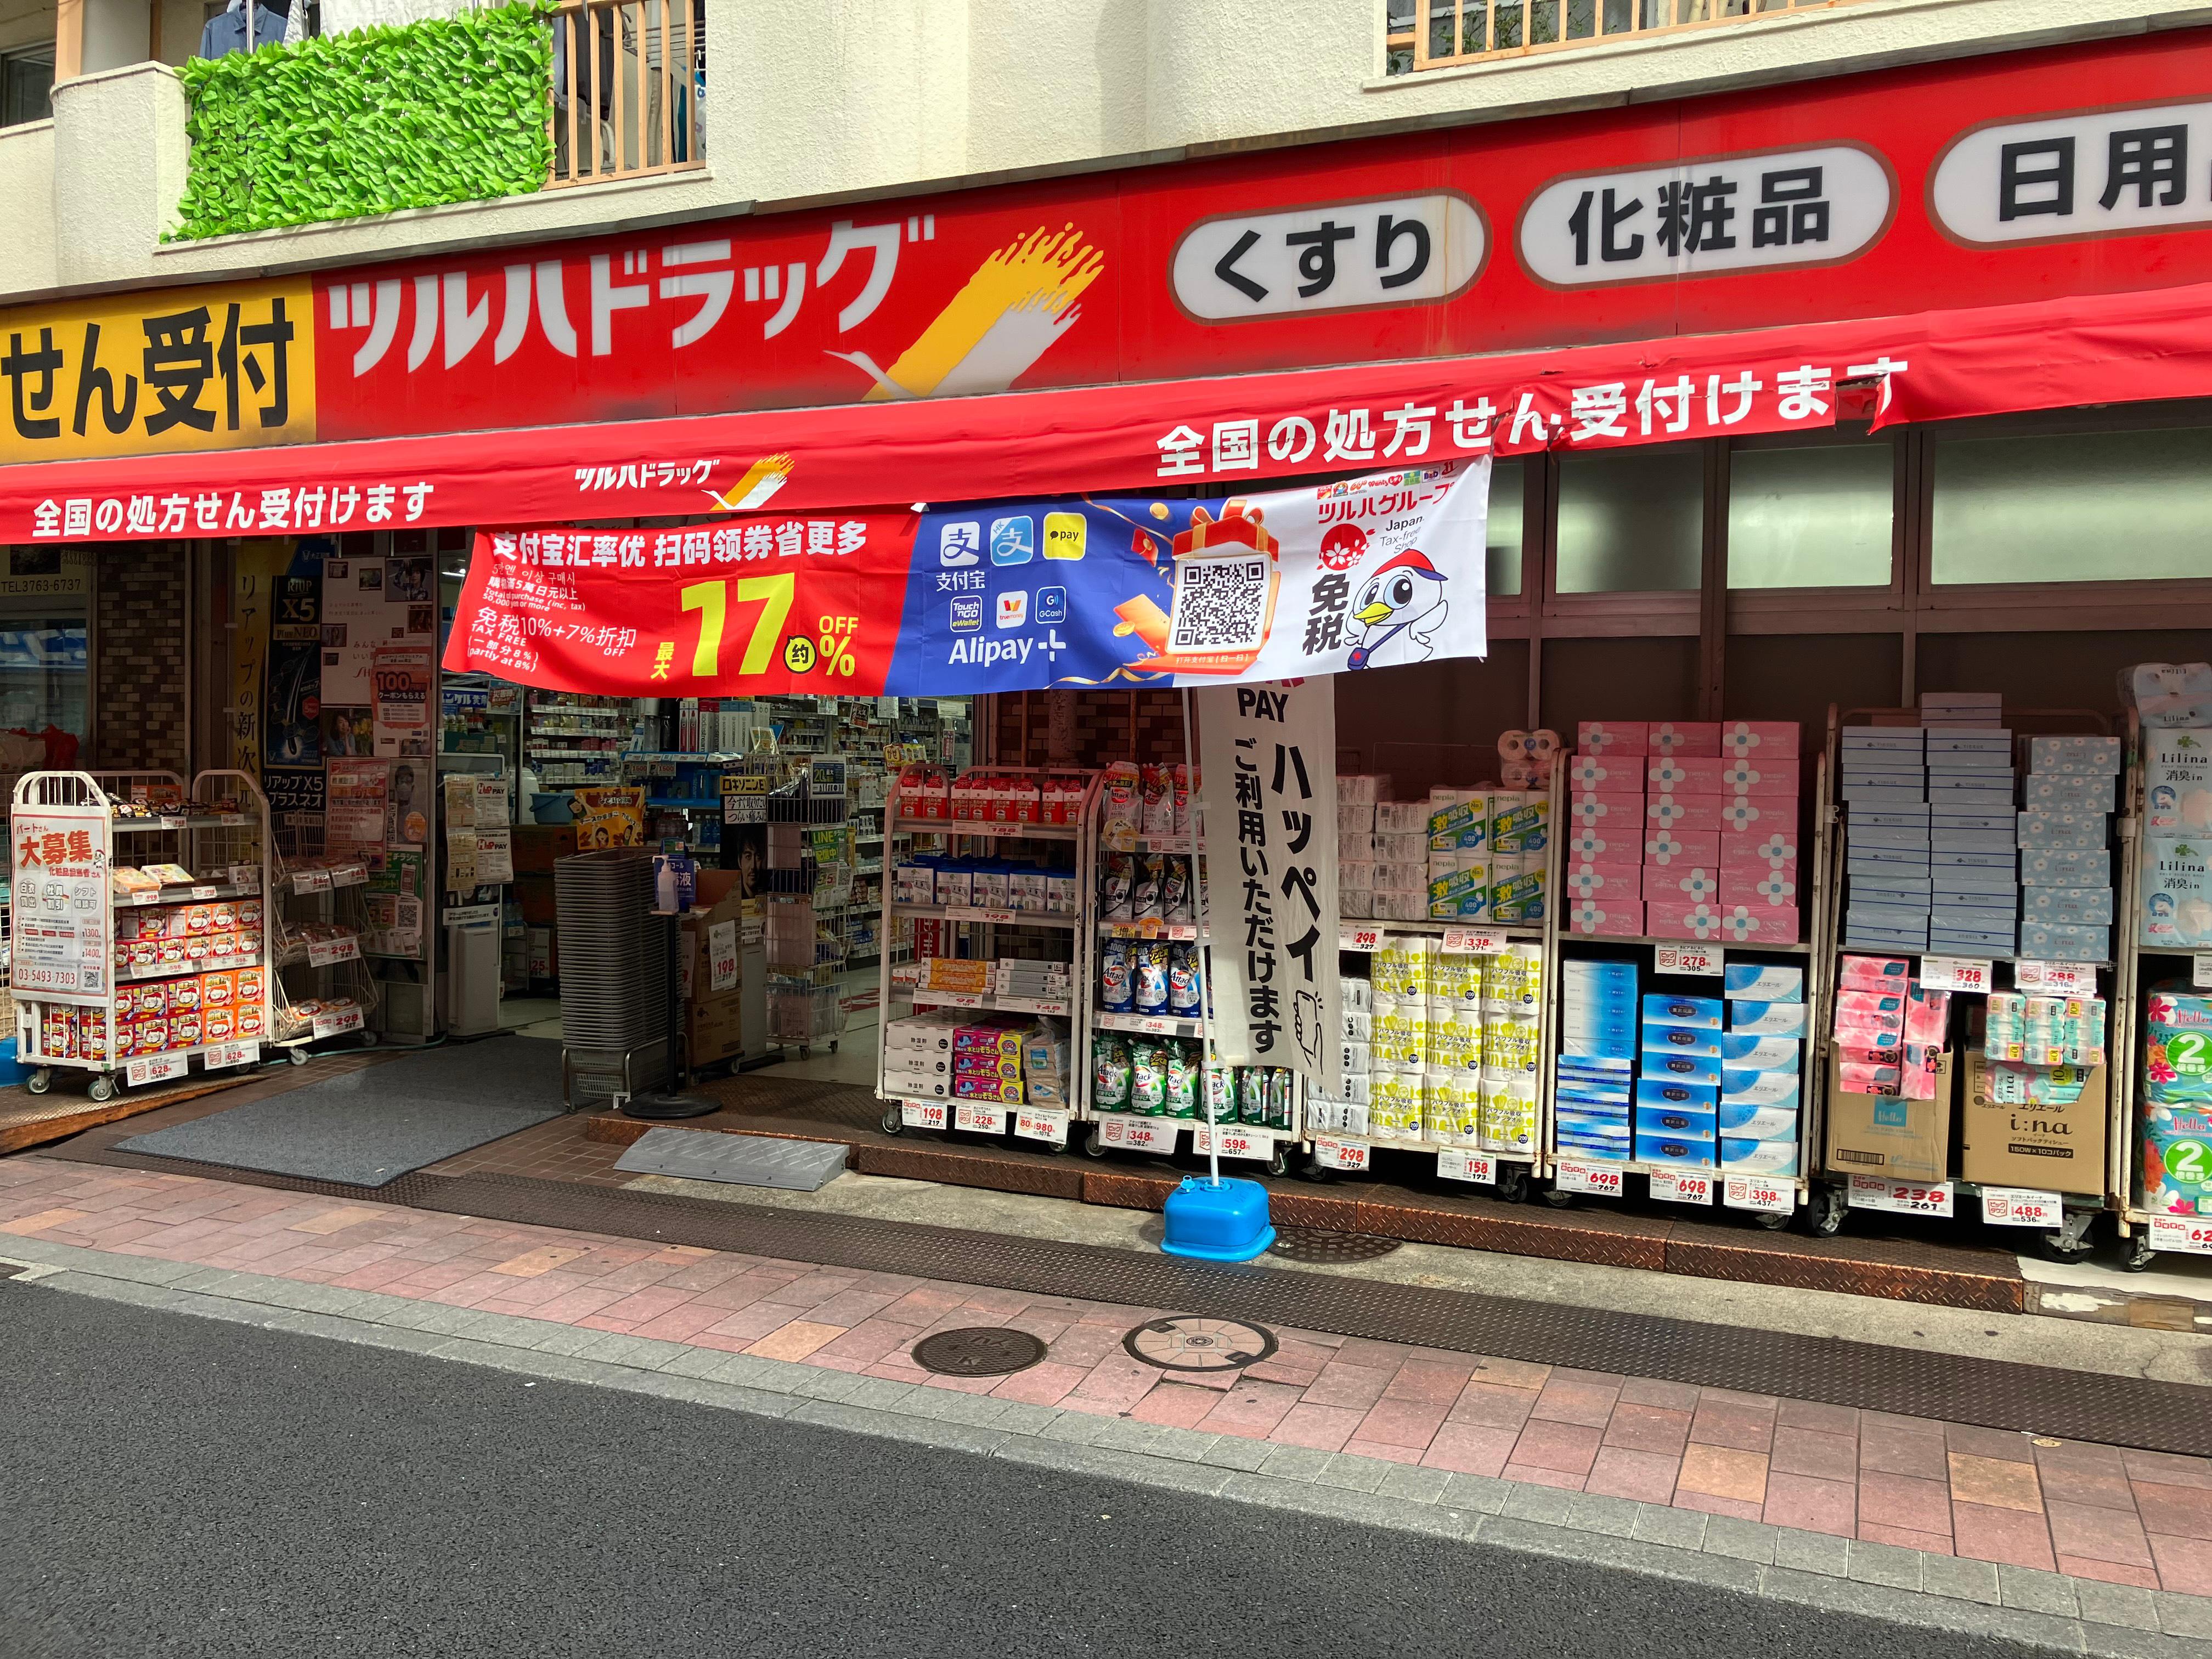 Images ツルハドラッグ 梅屋敷店